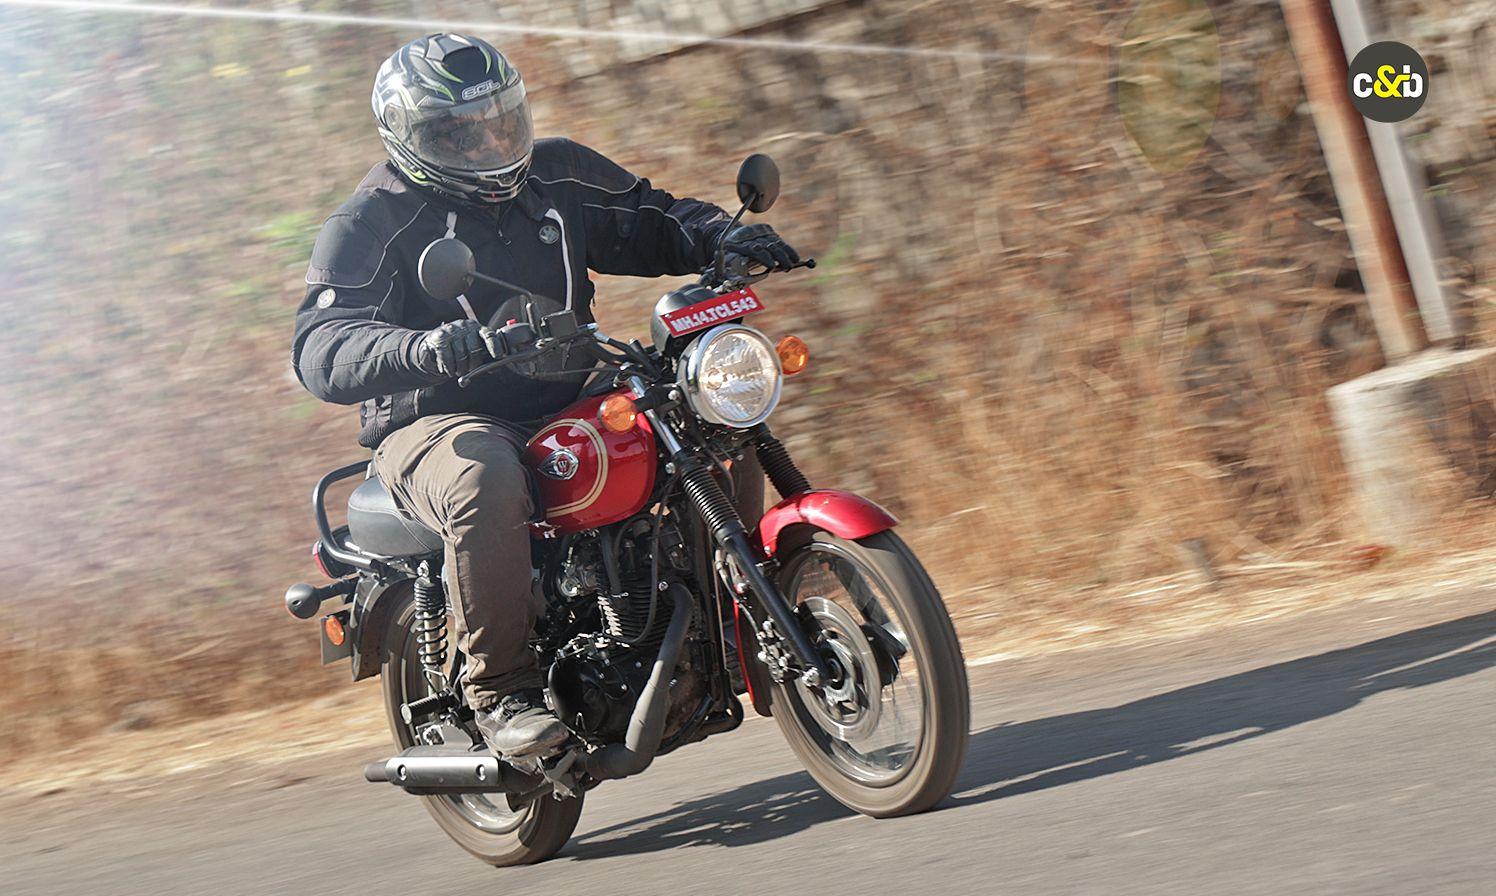 We recently spent a day with the new Kawasaki W175, the company's newest retro bike. Can it take on some of the established players in the modern classic segment? We find out.